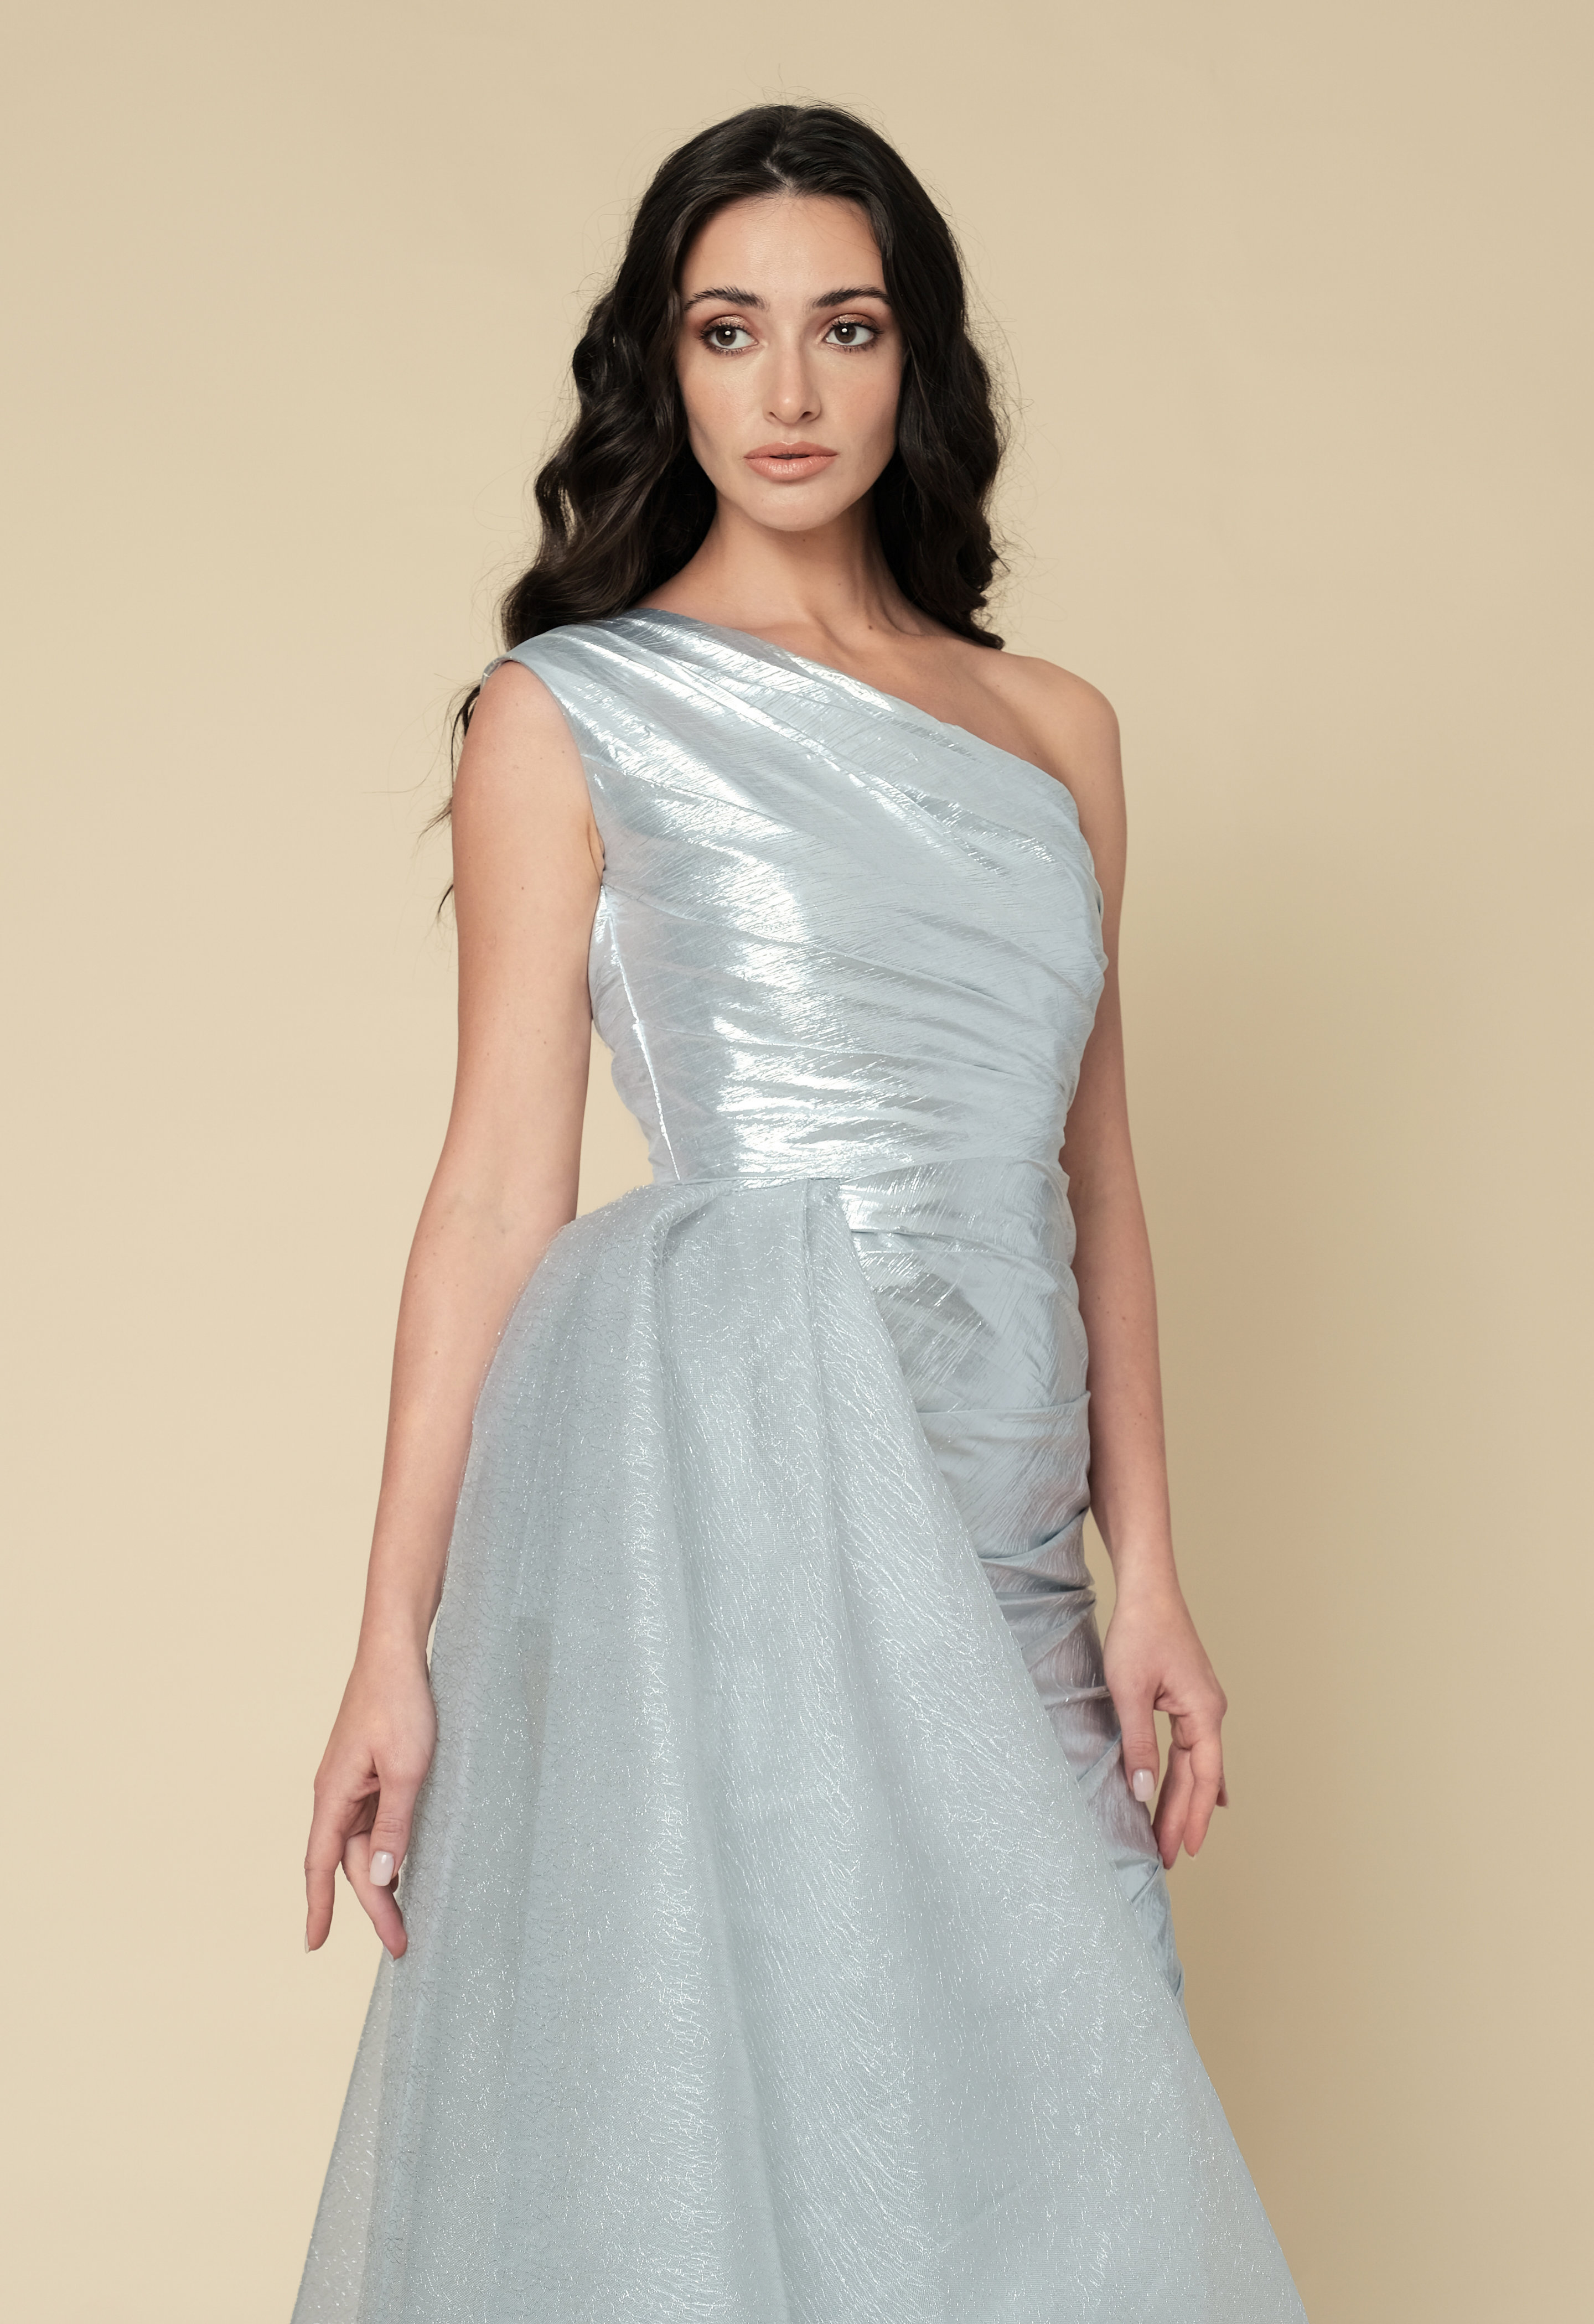 Silver metallic one shoulder gown